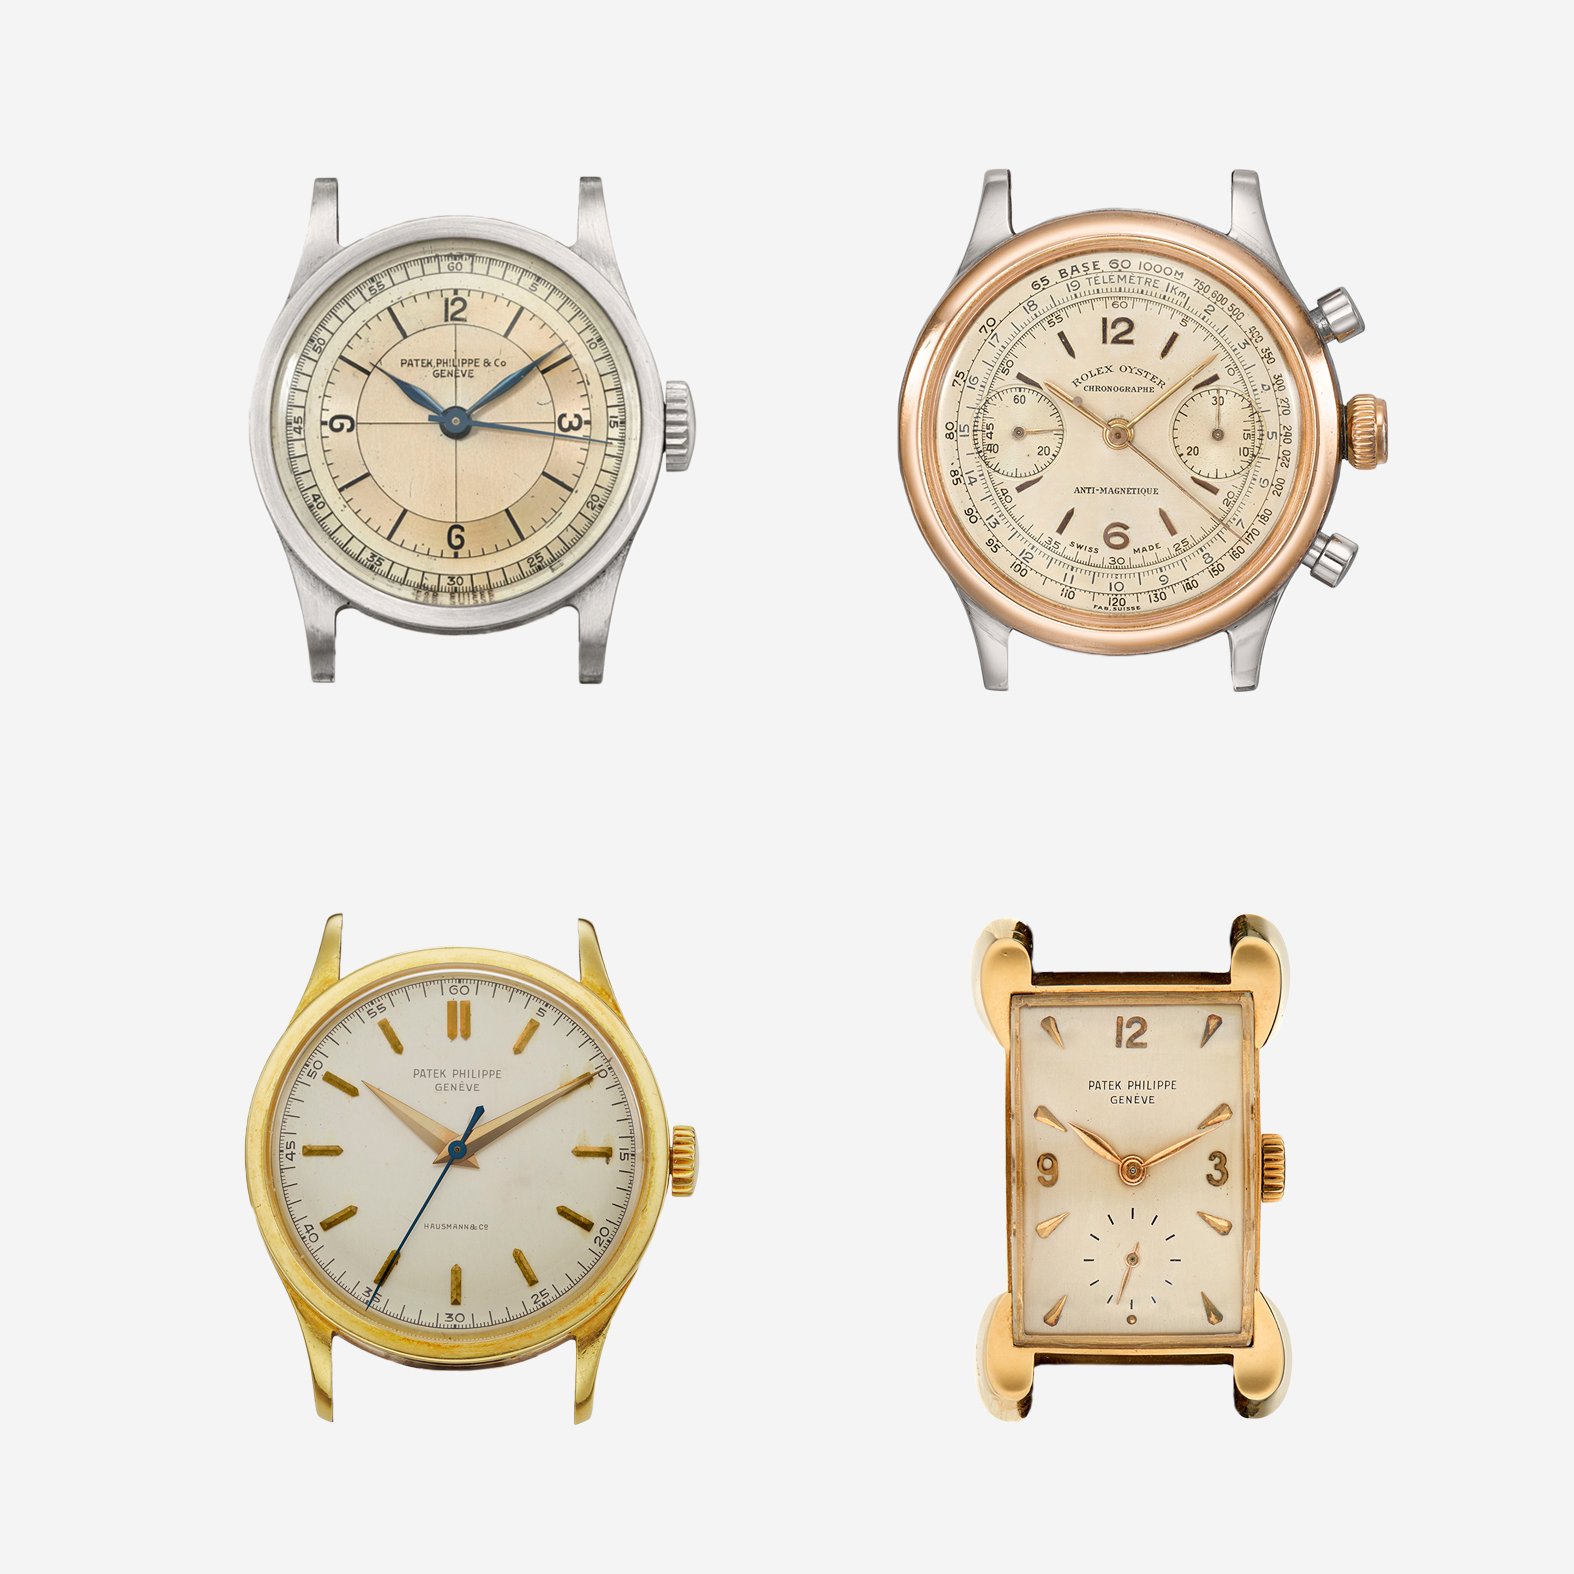 Grid of 4 watches owned by Andy Warhol in Understanding Andy Warhol as a collector for A Collected Man